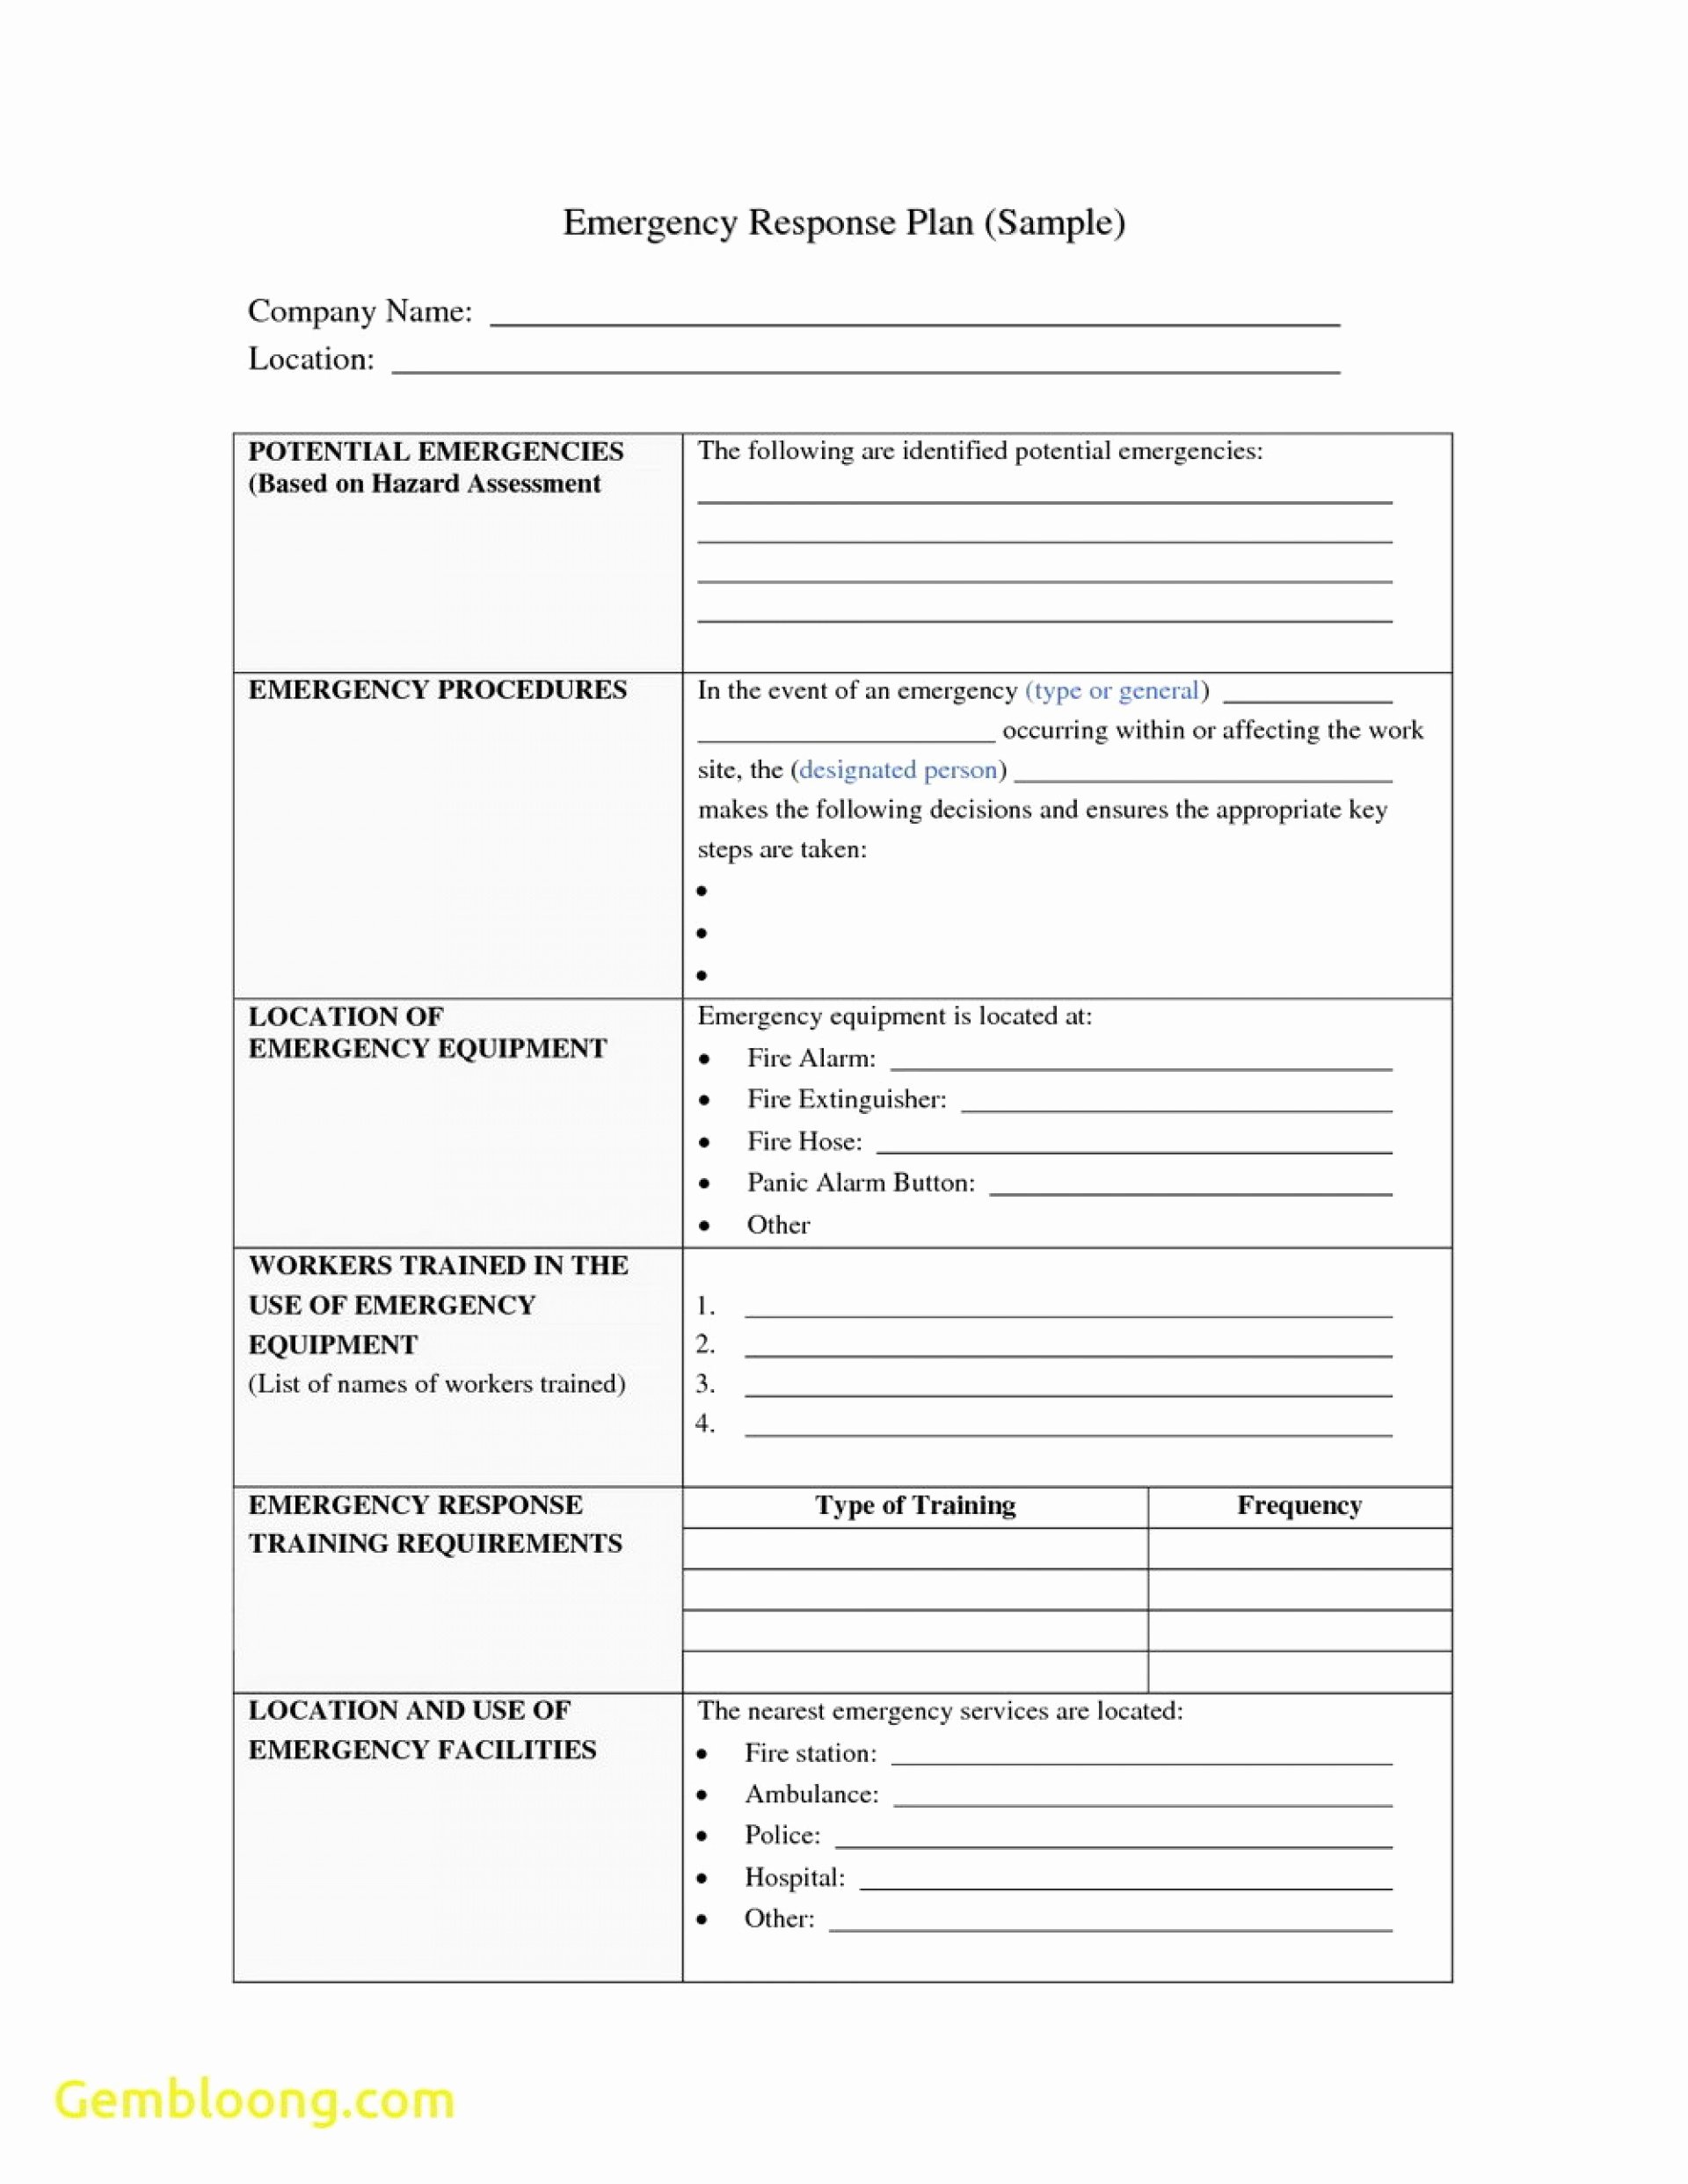 Nist Incident Response Plan Template Awesome Fearsome Incident Response Plan Template Nist Tinypetition